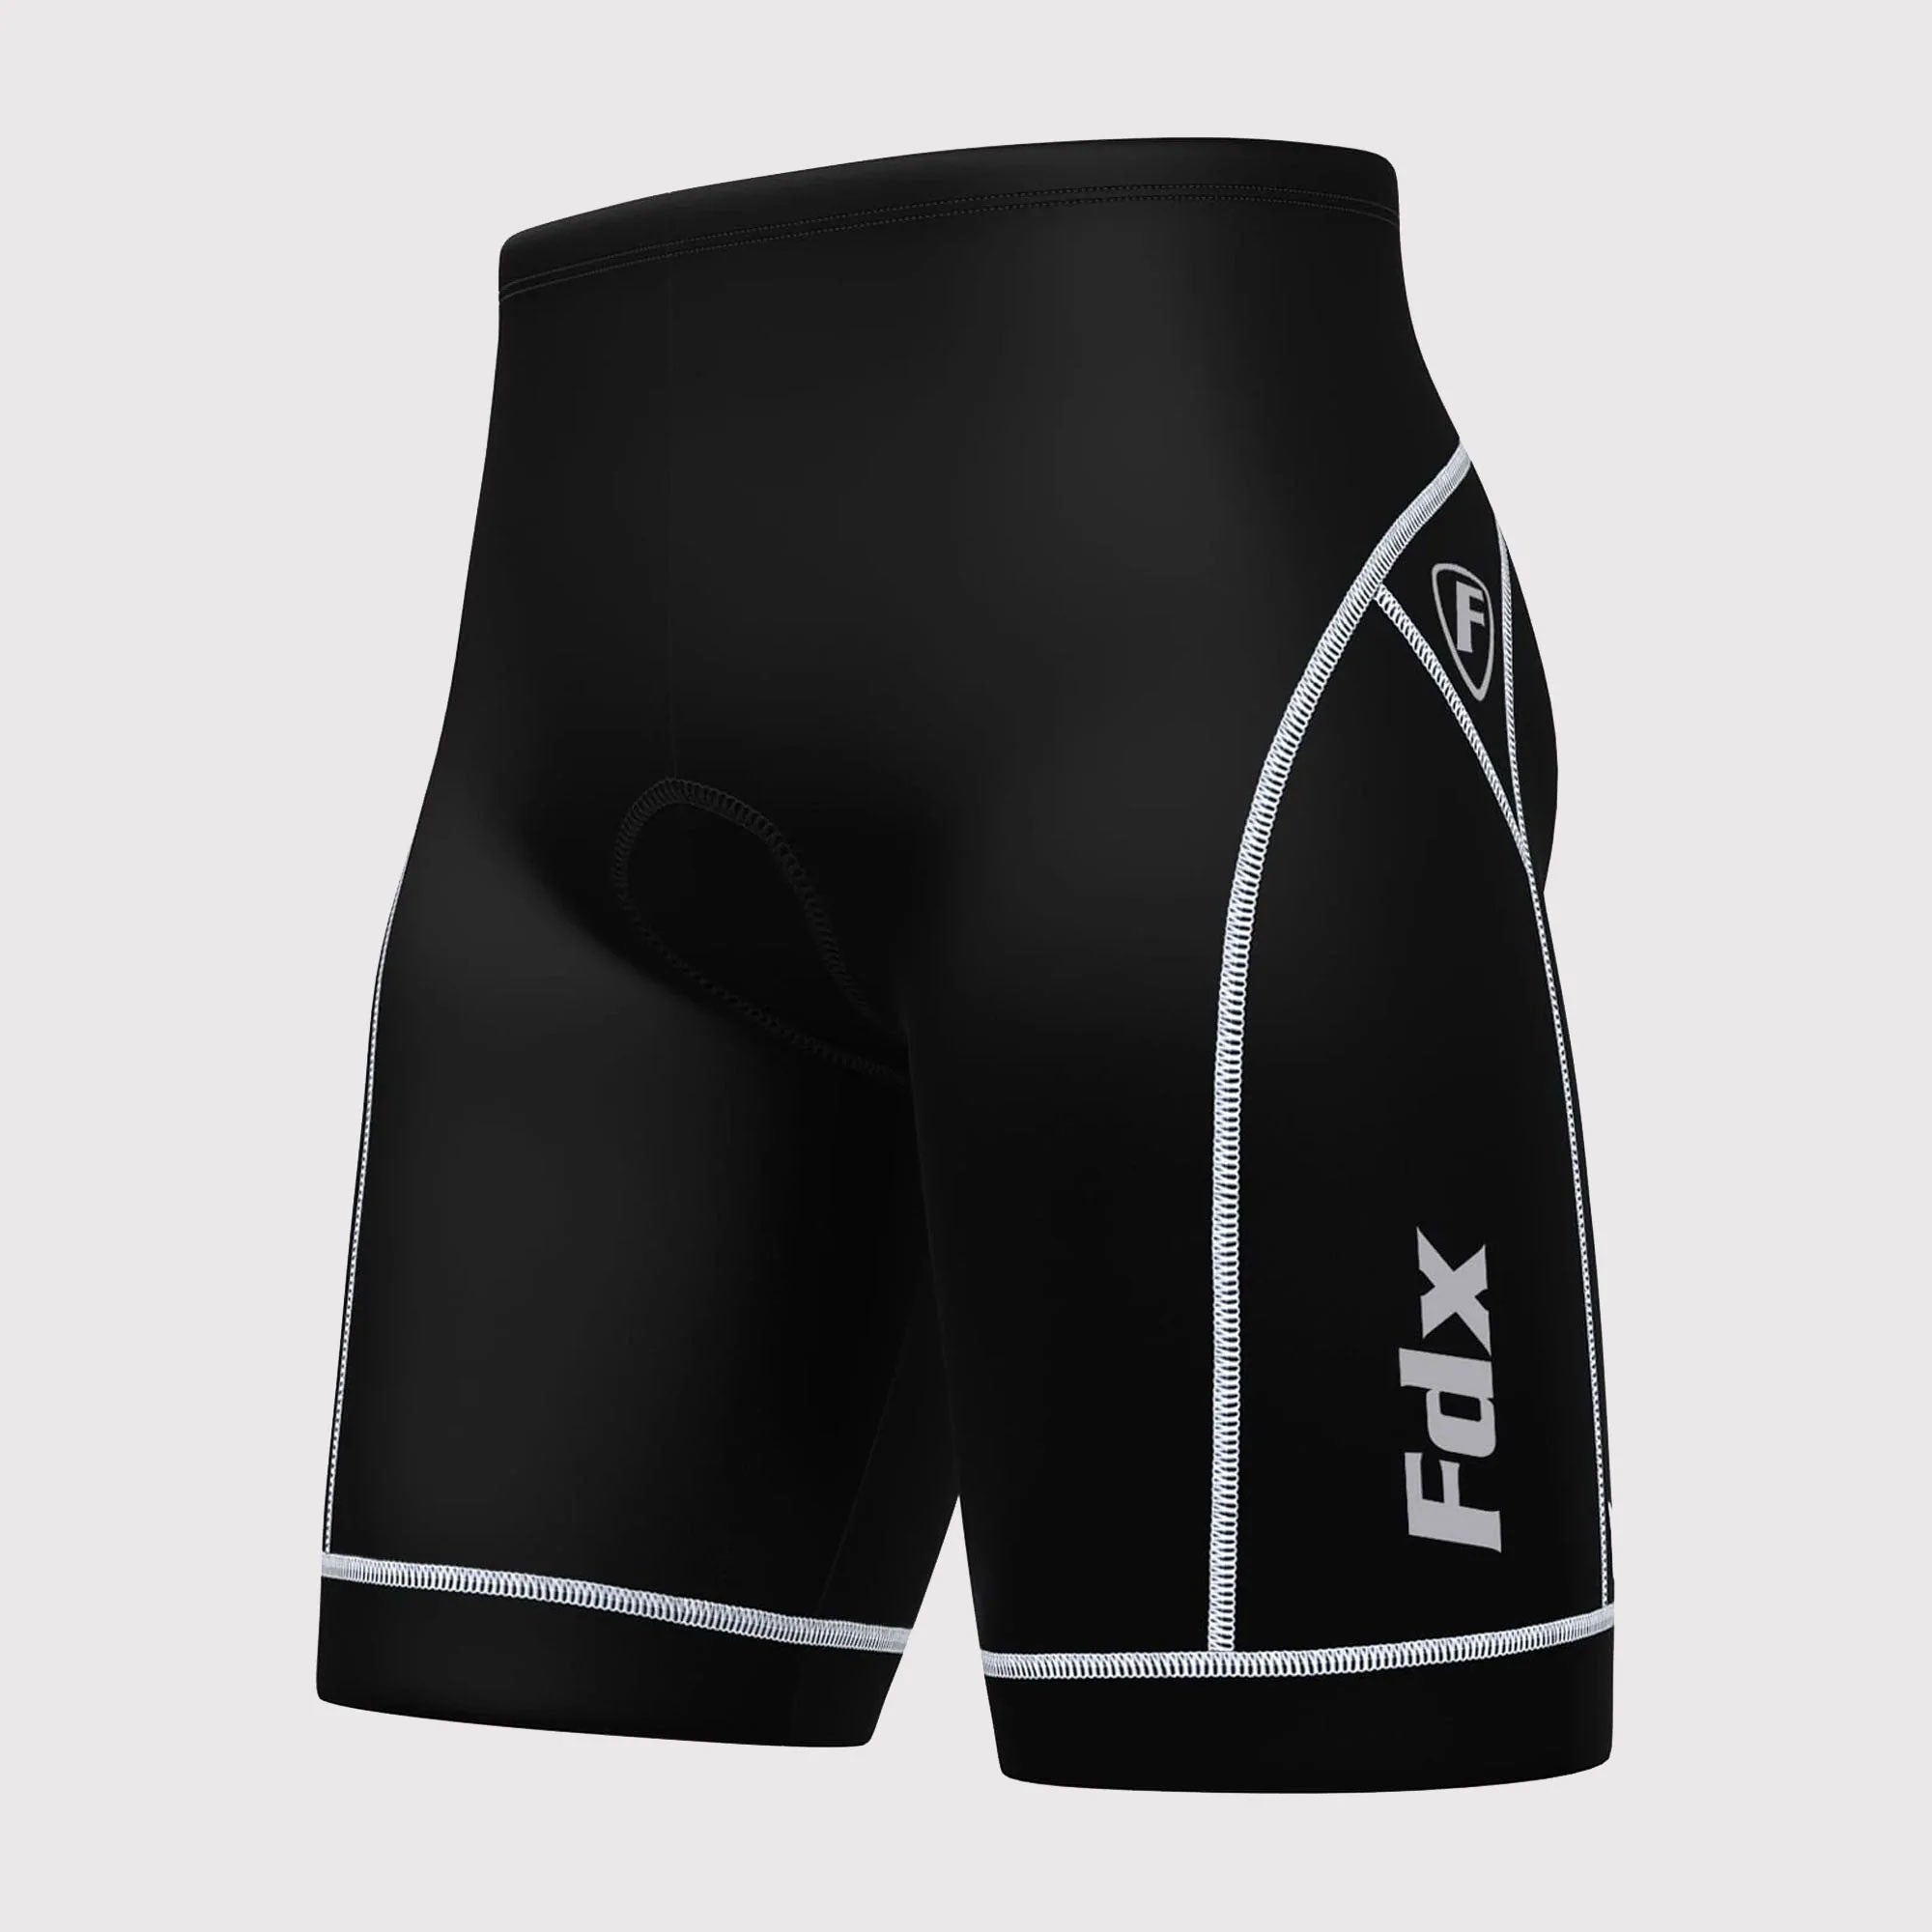 Fdx Men's Black & White Gel Padded Cycling Shorts for Summer Best Outdoor Knickers Road Bike Short Length Pants - Ridest